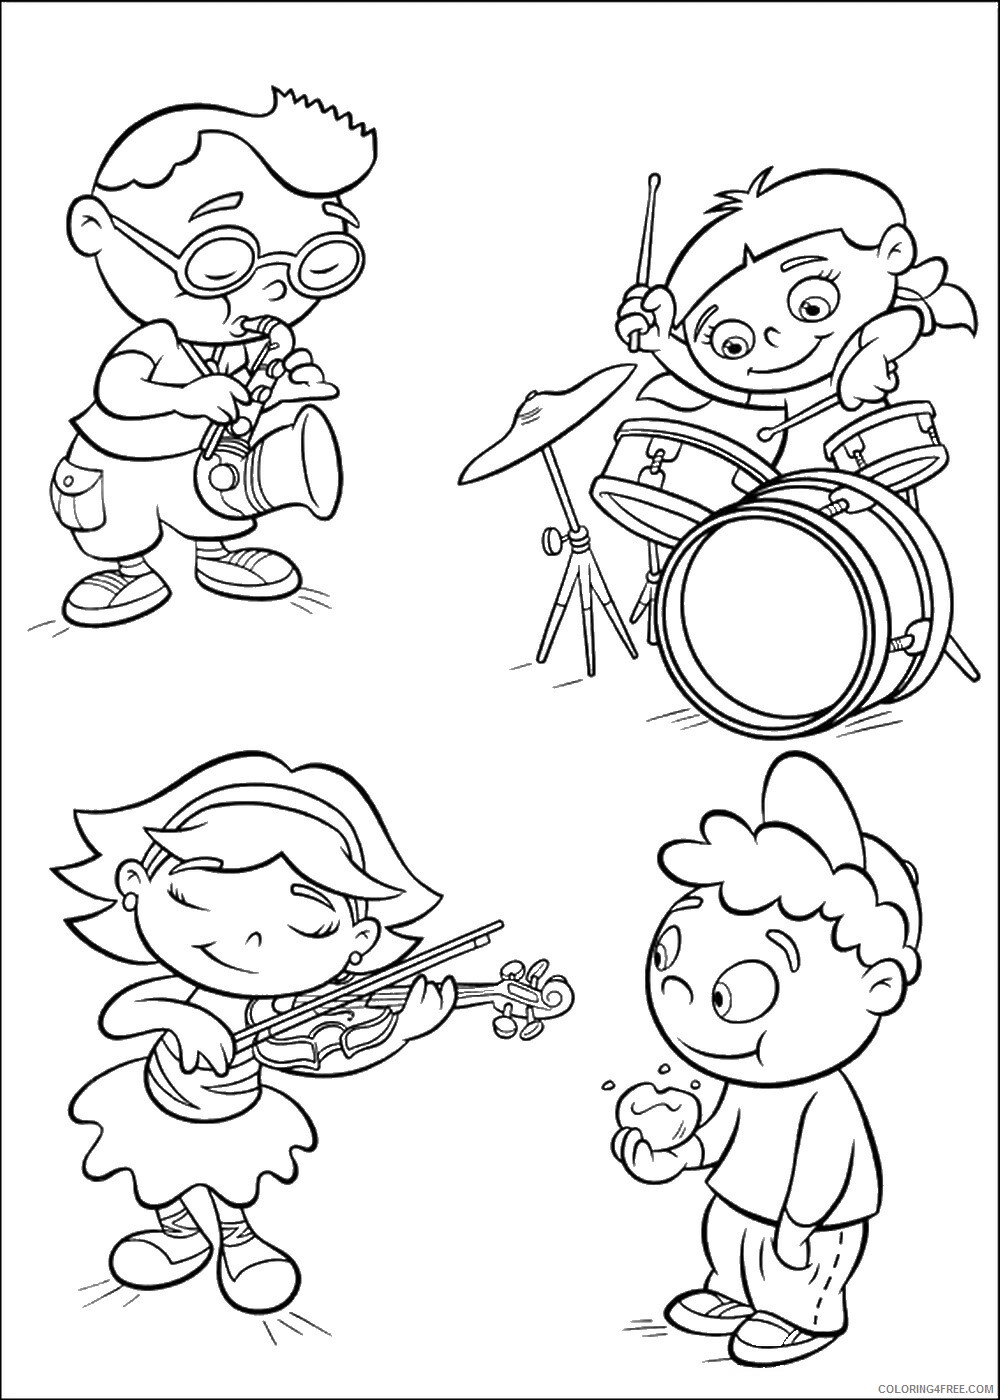 Little Einsteins Coloring Pages TV Film little_einsteins_15 Printable 2020 04479 Coloring4free